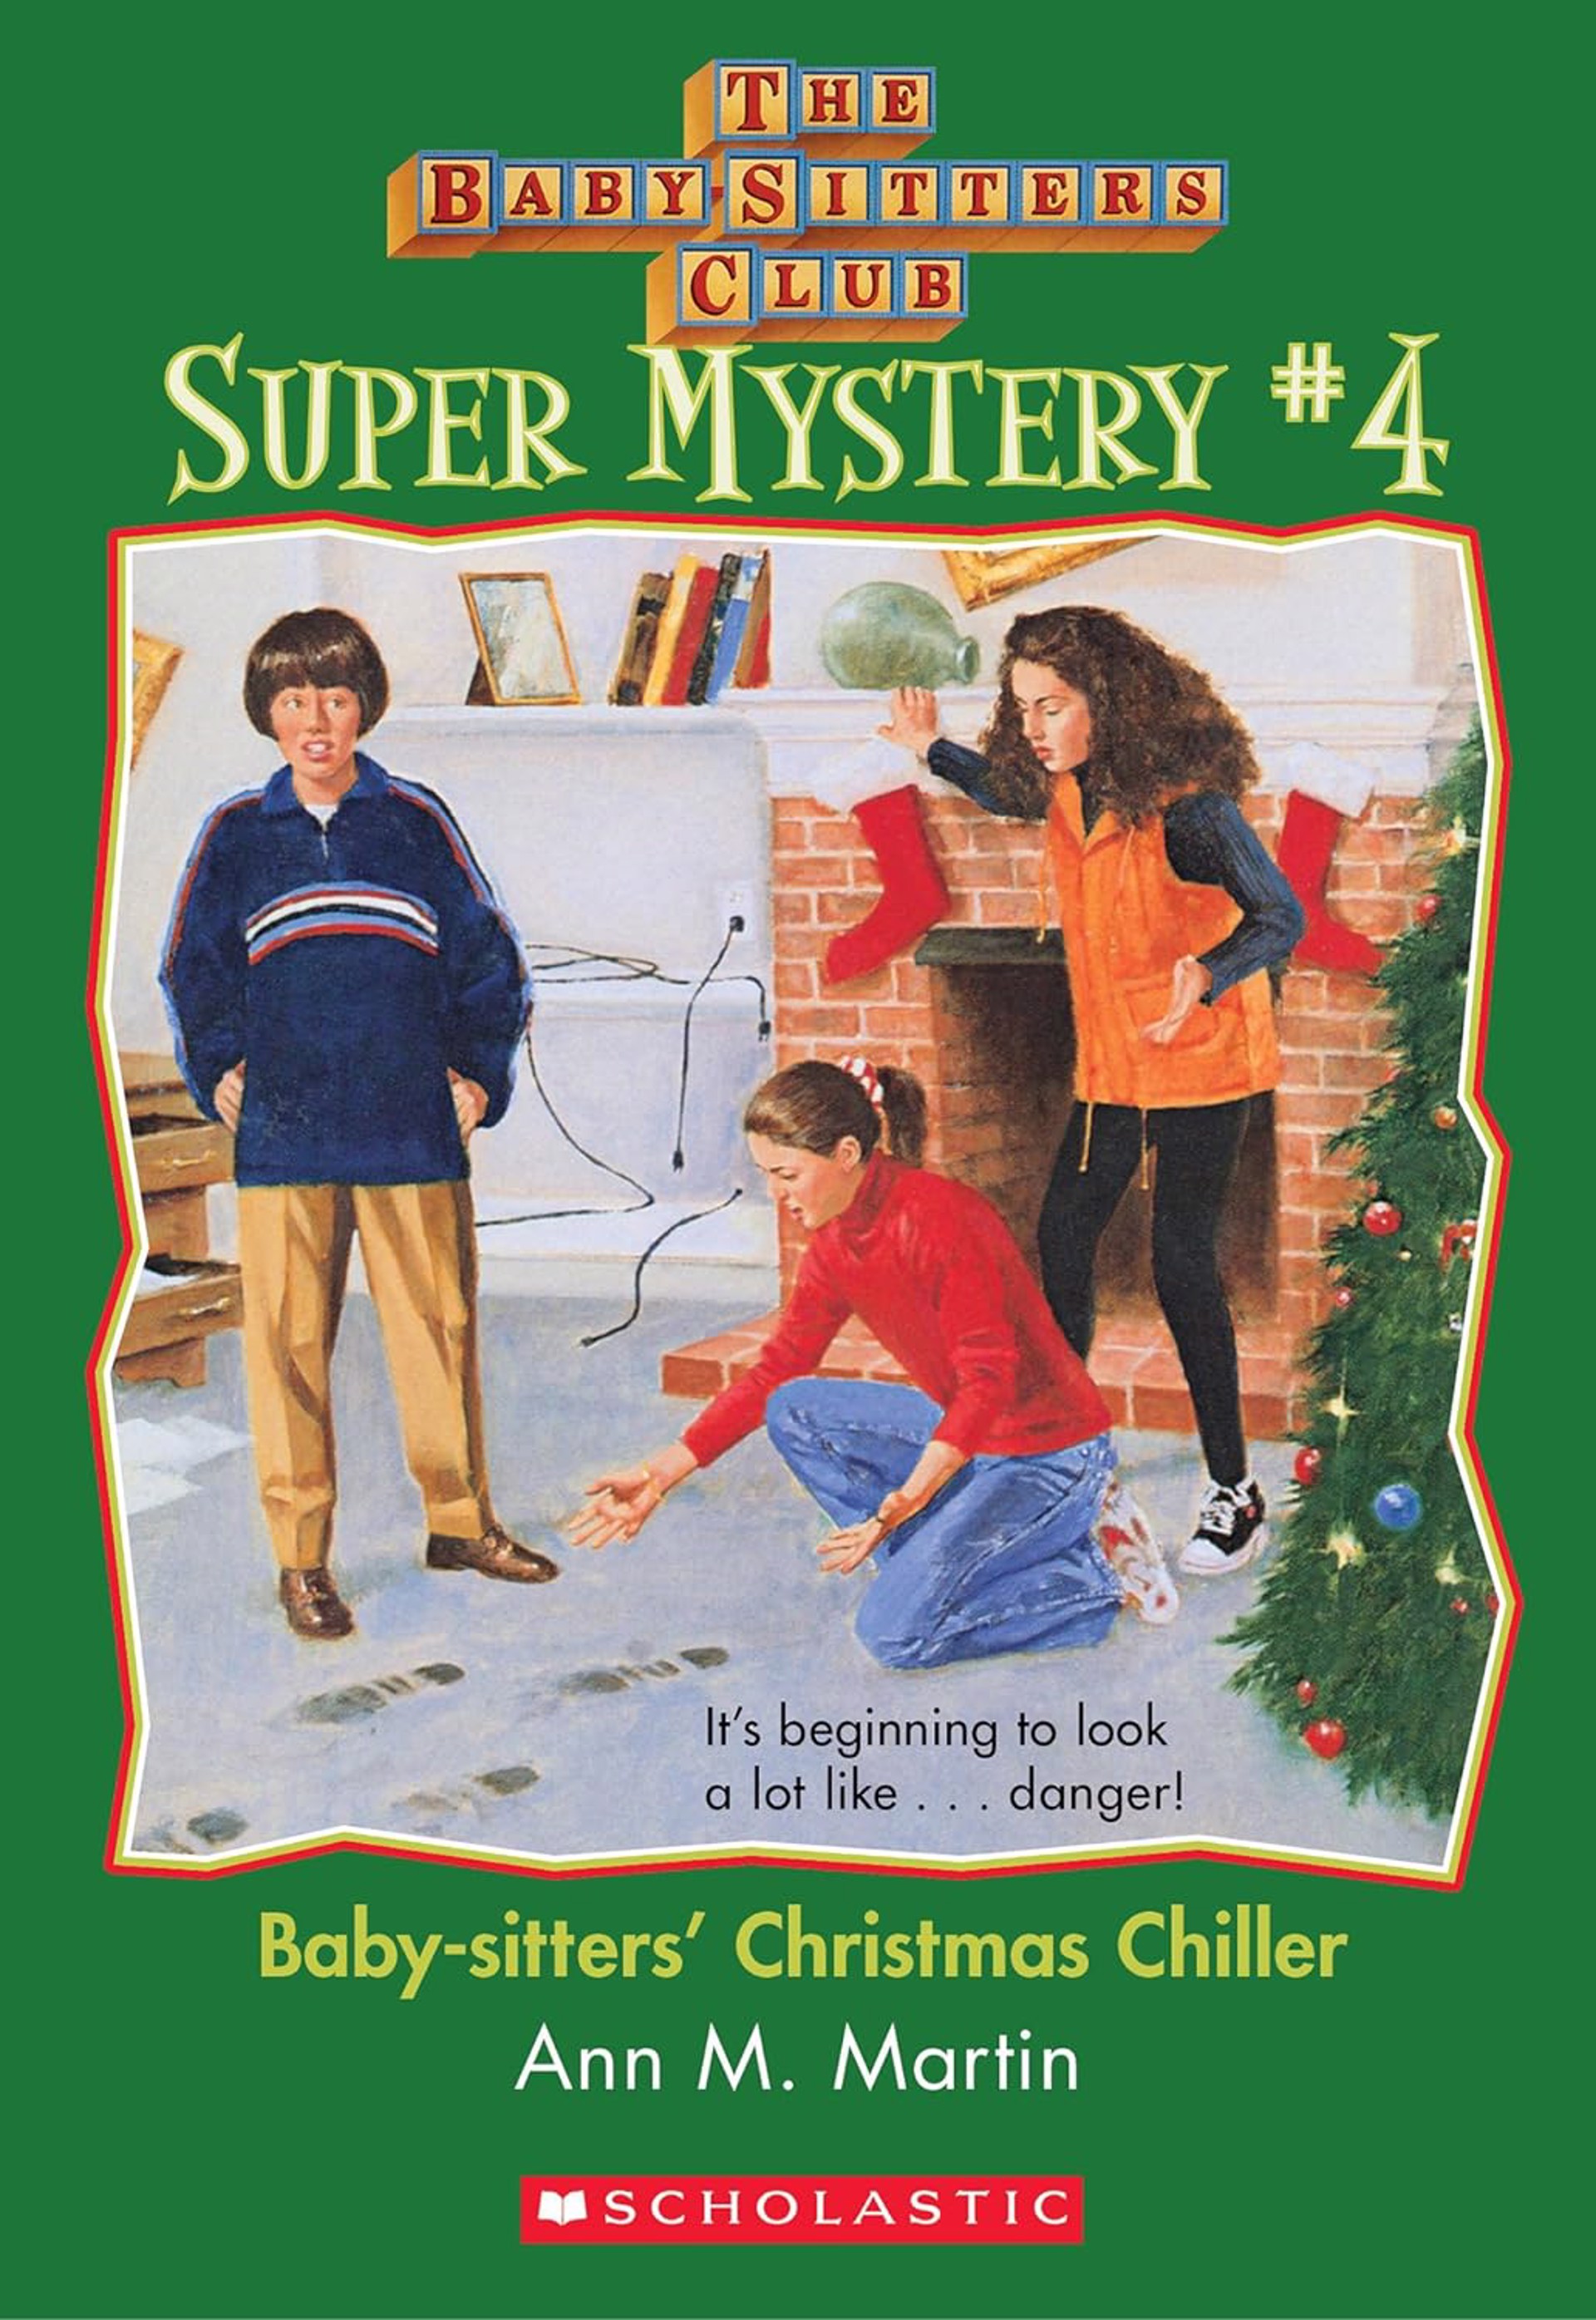 The Babysitter’s Club Super Mystery #4 “Baby-sitter’s Christmas Chiller” by Hodges Soileau